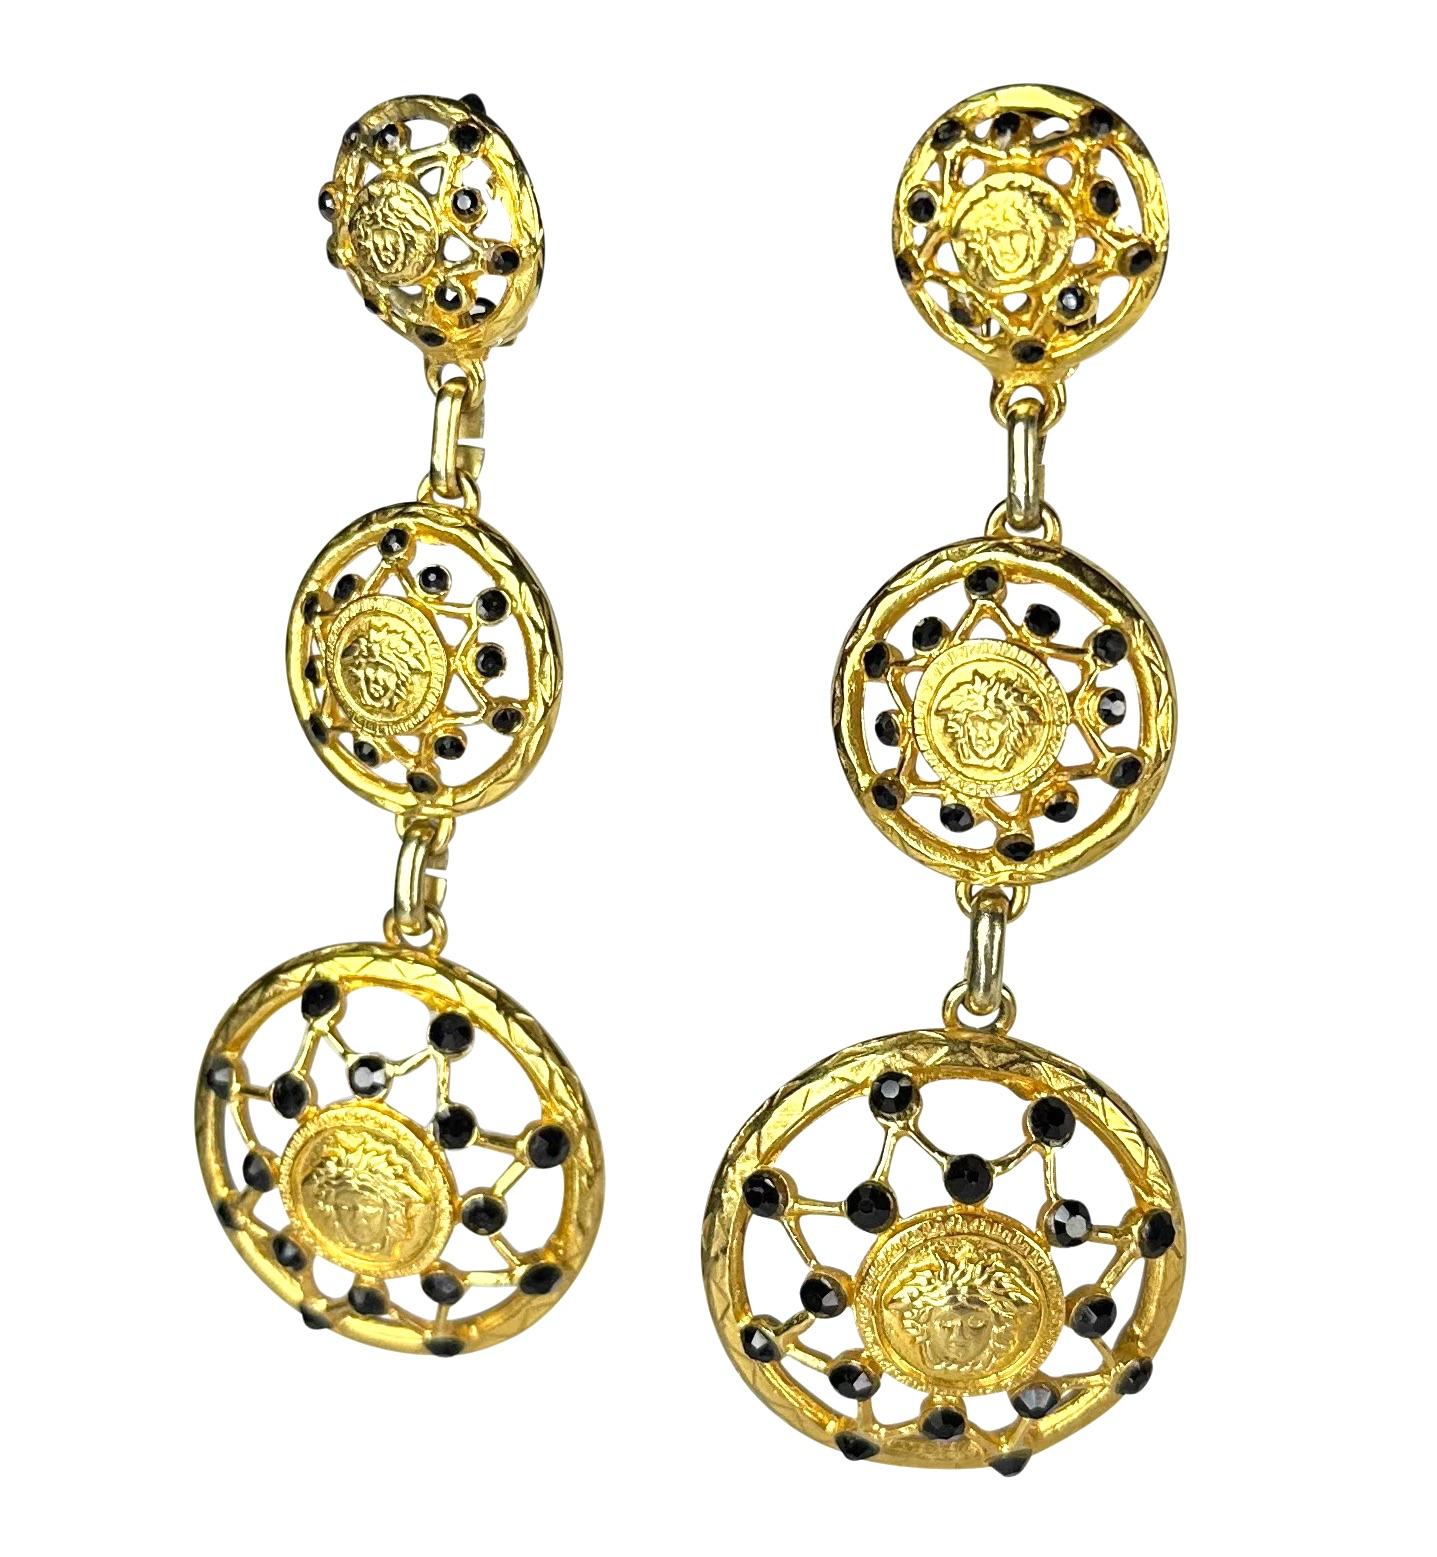 Presenting a pair of gold-tone Gianni Versace drop earrings, designed by Gianni Versace. From the Fall/Winter 1992 'Miss S&M' collection, these truly incredible clip-on earrings feature a Versace Medusa logo at the center of each circle surrounded